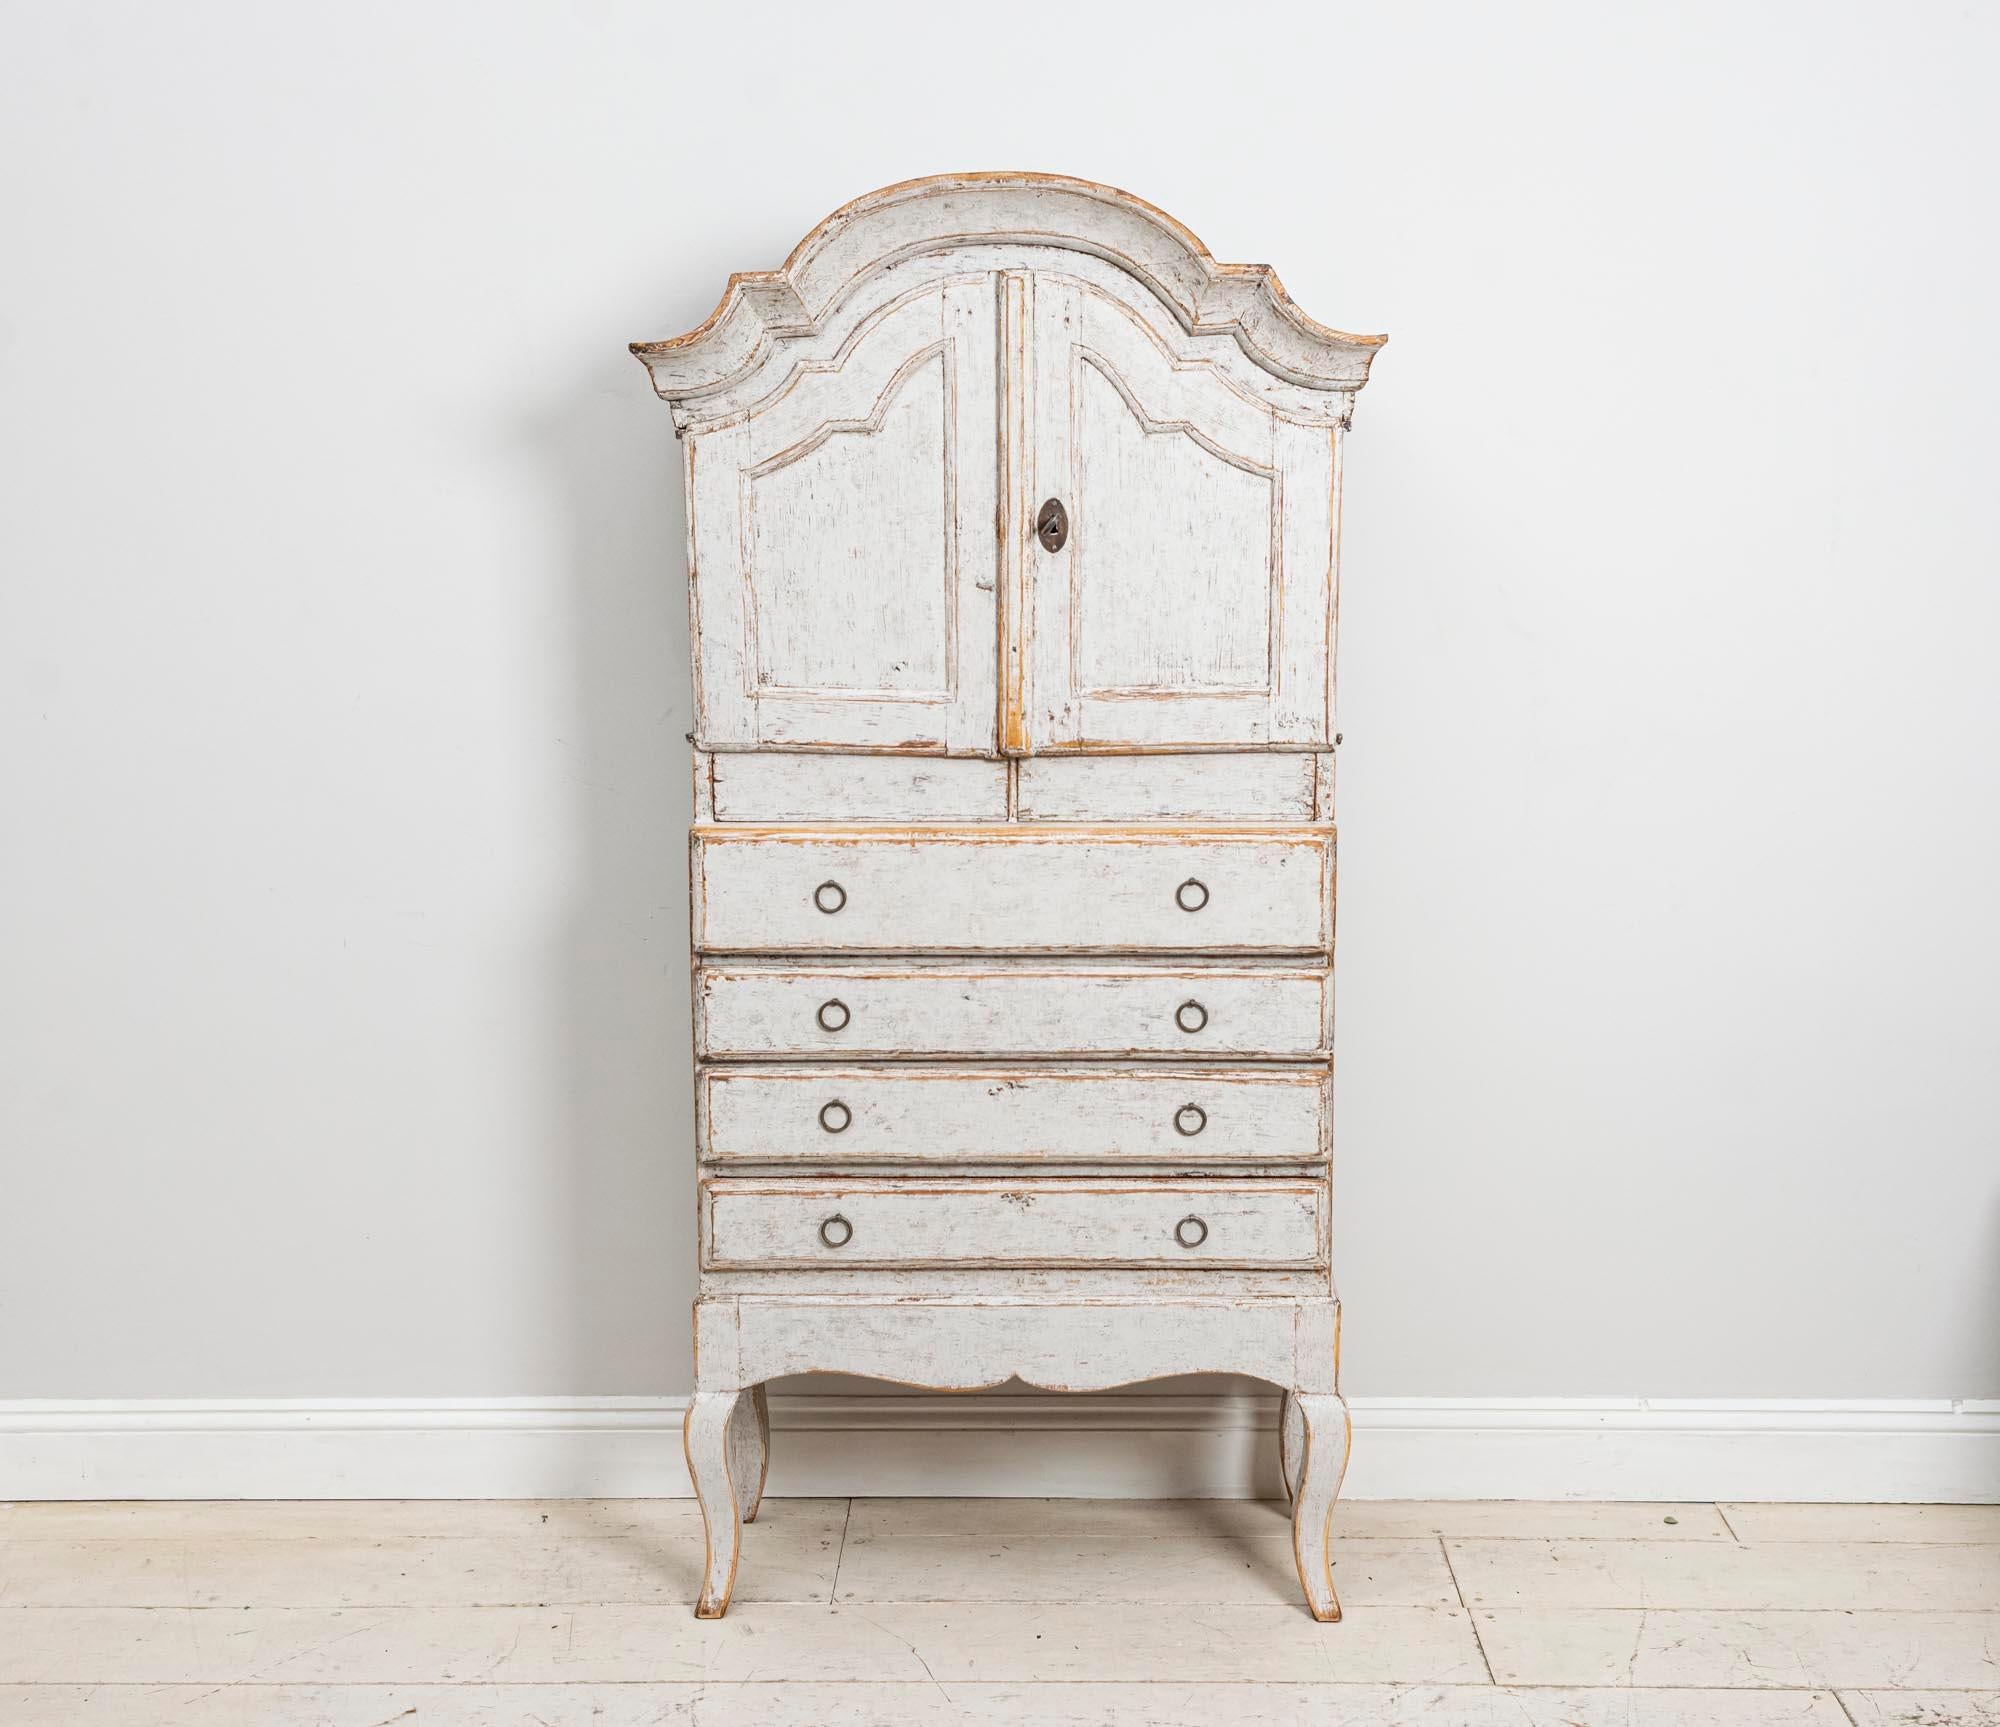 Painted Swedish Rococo cabinet. This slightly quirky circa 19th century piece dates to circa 1820 and is of a more unusual smaller size.

The cabinet is in one piece and does not come apart. The interior has been hand-scraped to reveal the